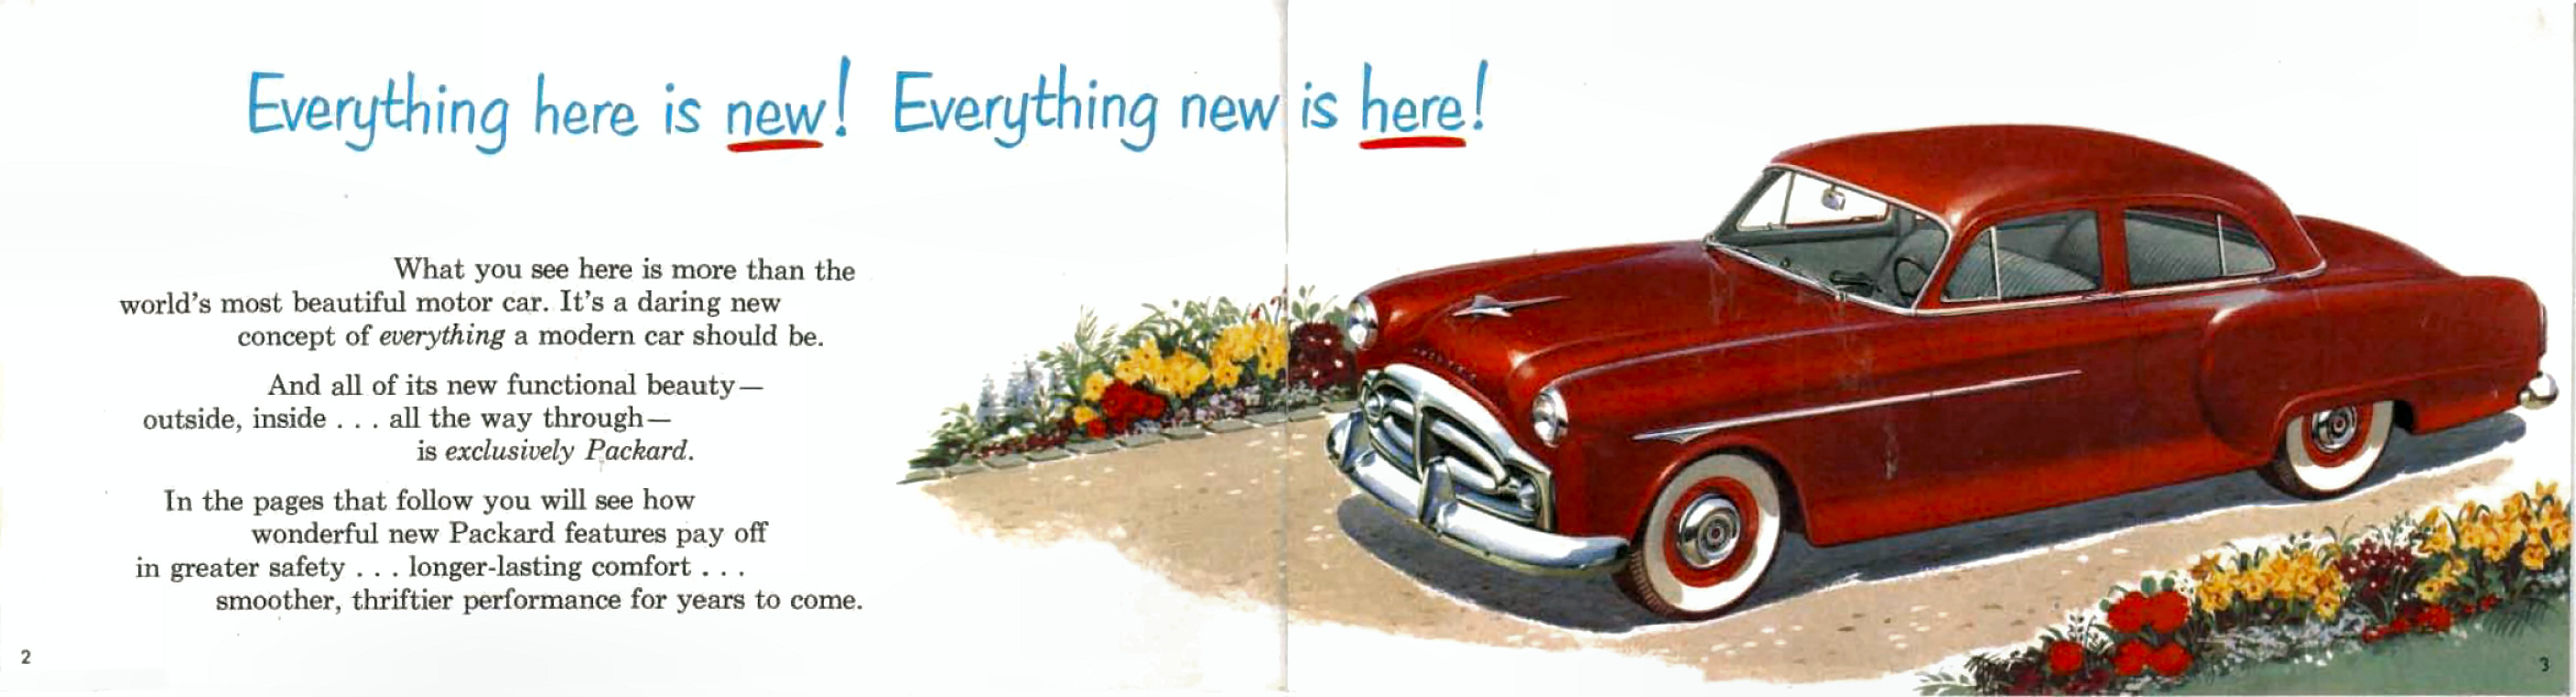 1951_Packard_One_for_51-02-03